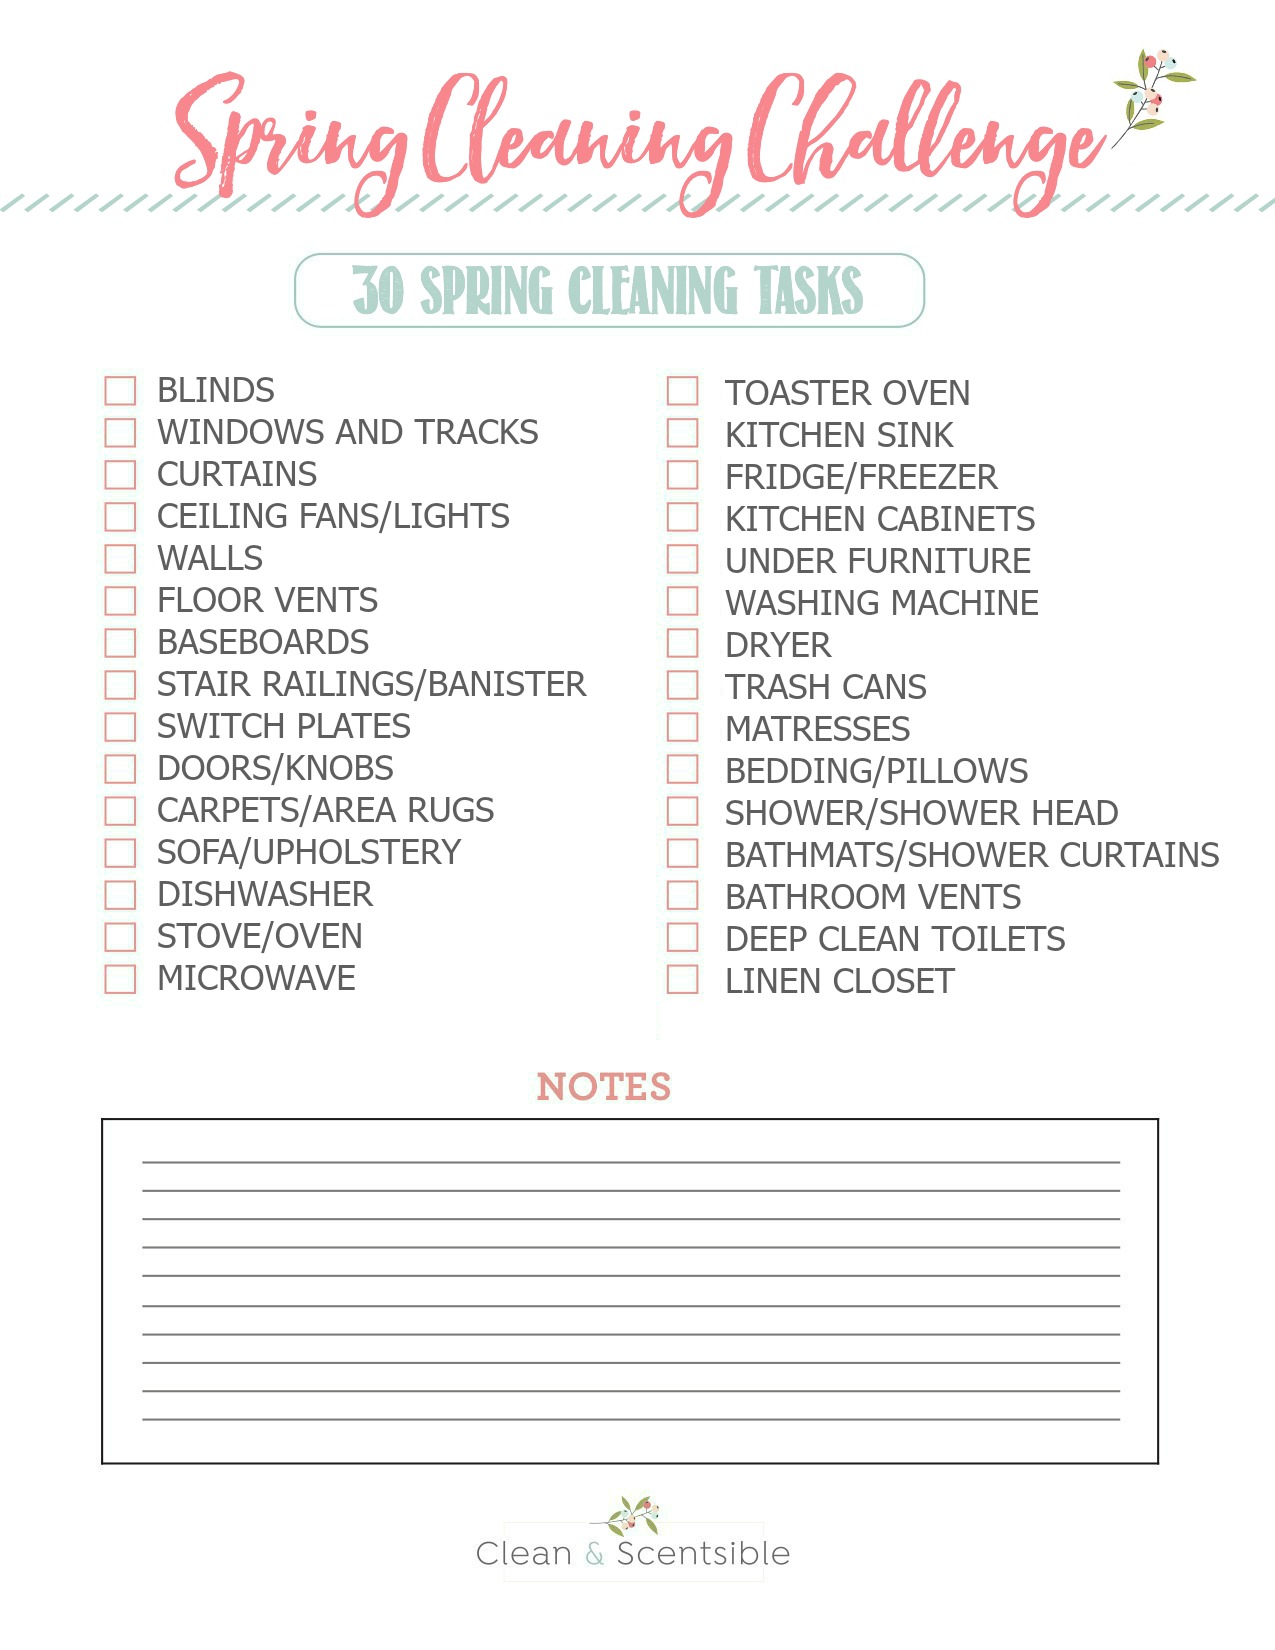 spring-cleaning-checklist-printable-editable-cleaning-schedule-deep